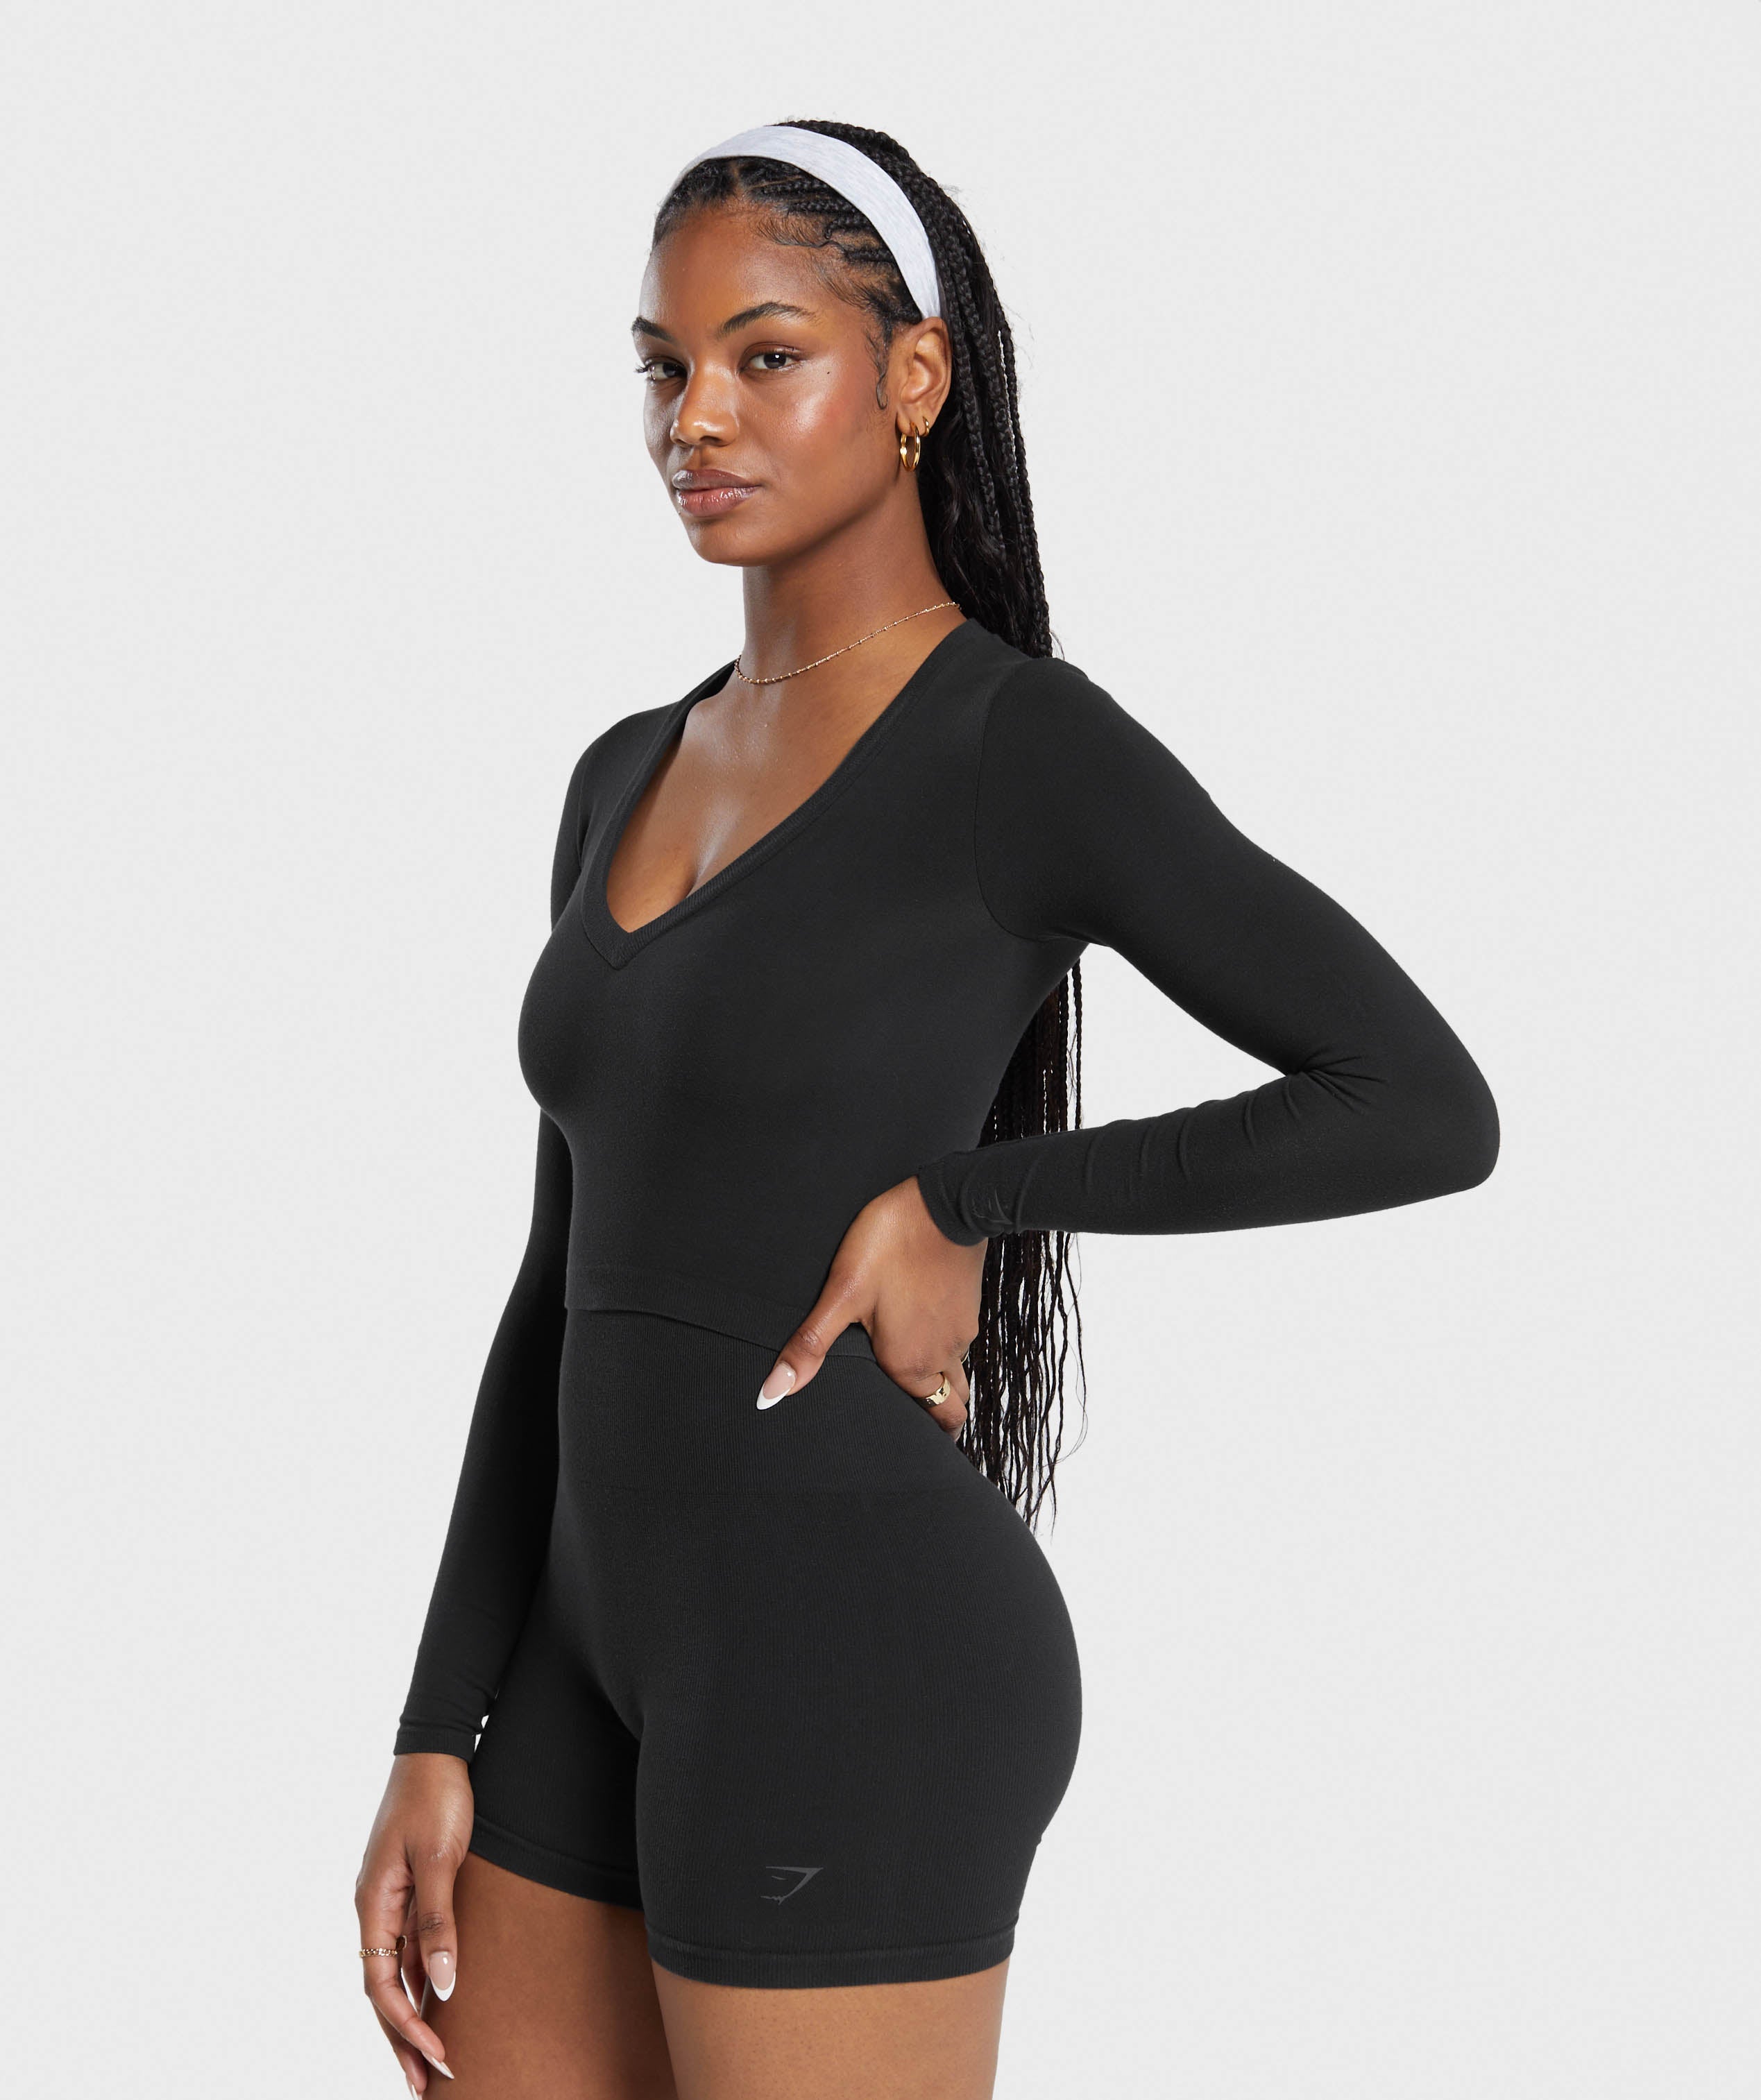 Cotton Seamless Long Sleeve Midi Top in Black - view 3